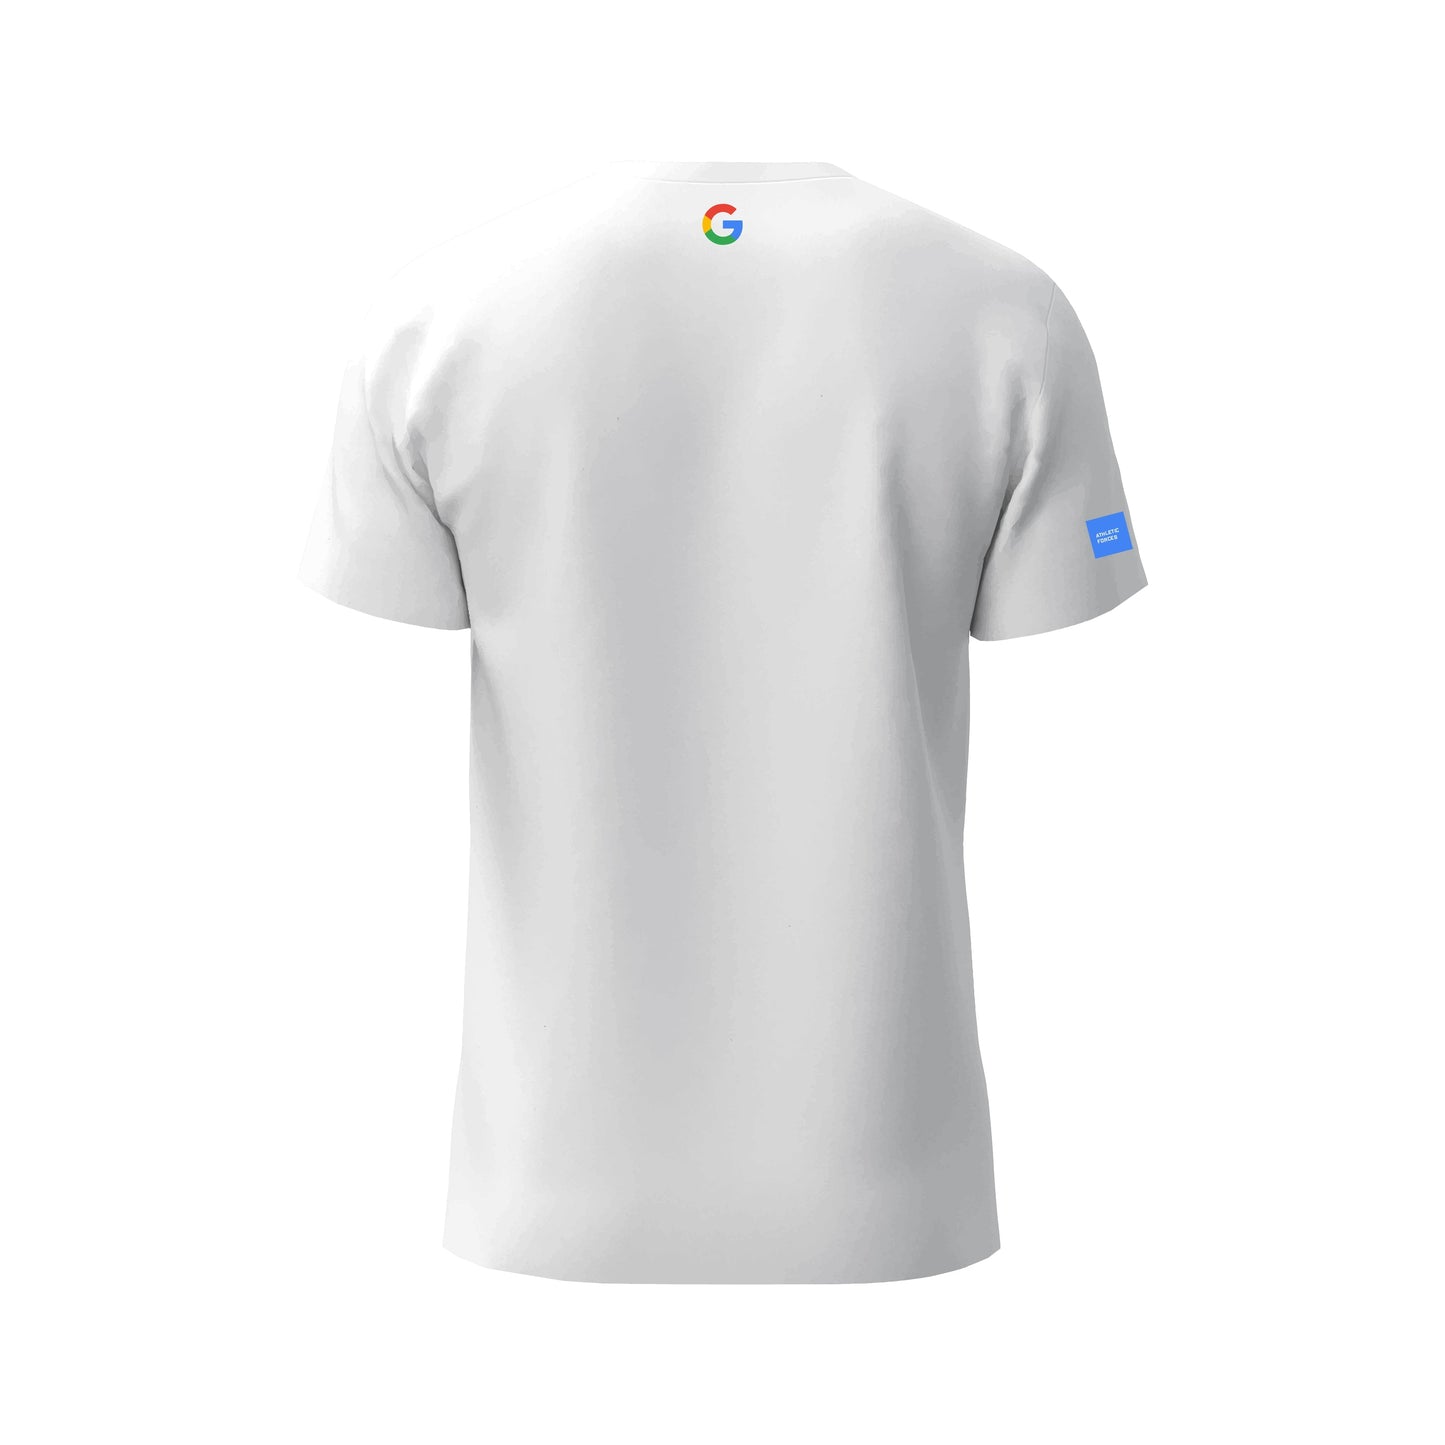 Google - Union of Forces ® T-Shirt by Athletic Forces -  Model 3